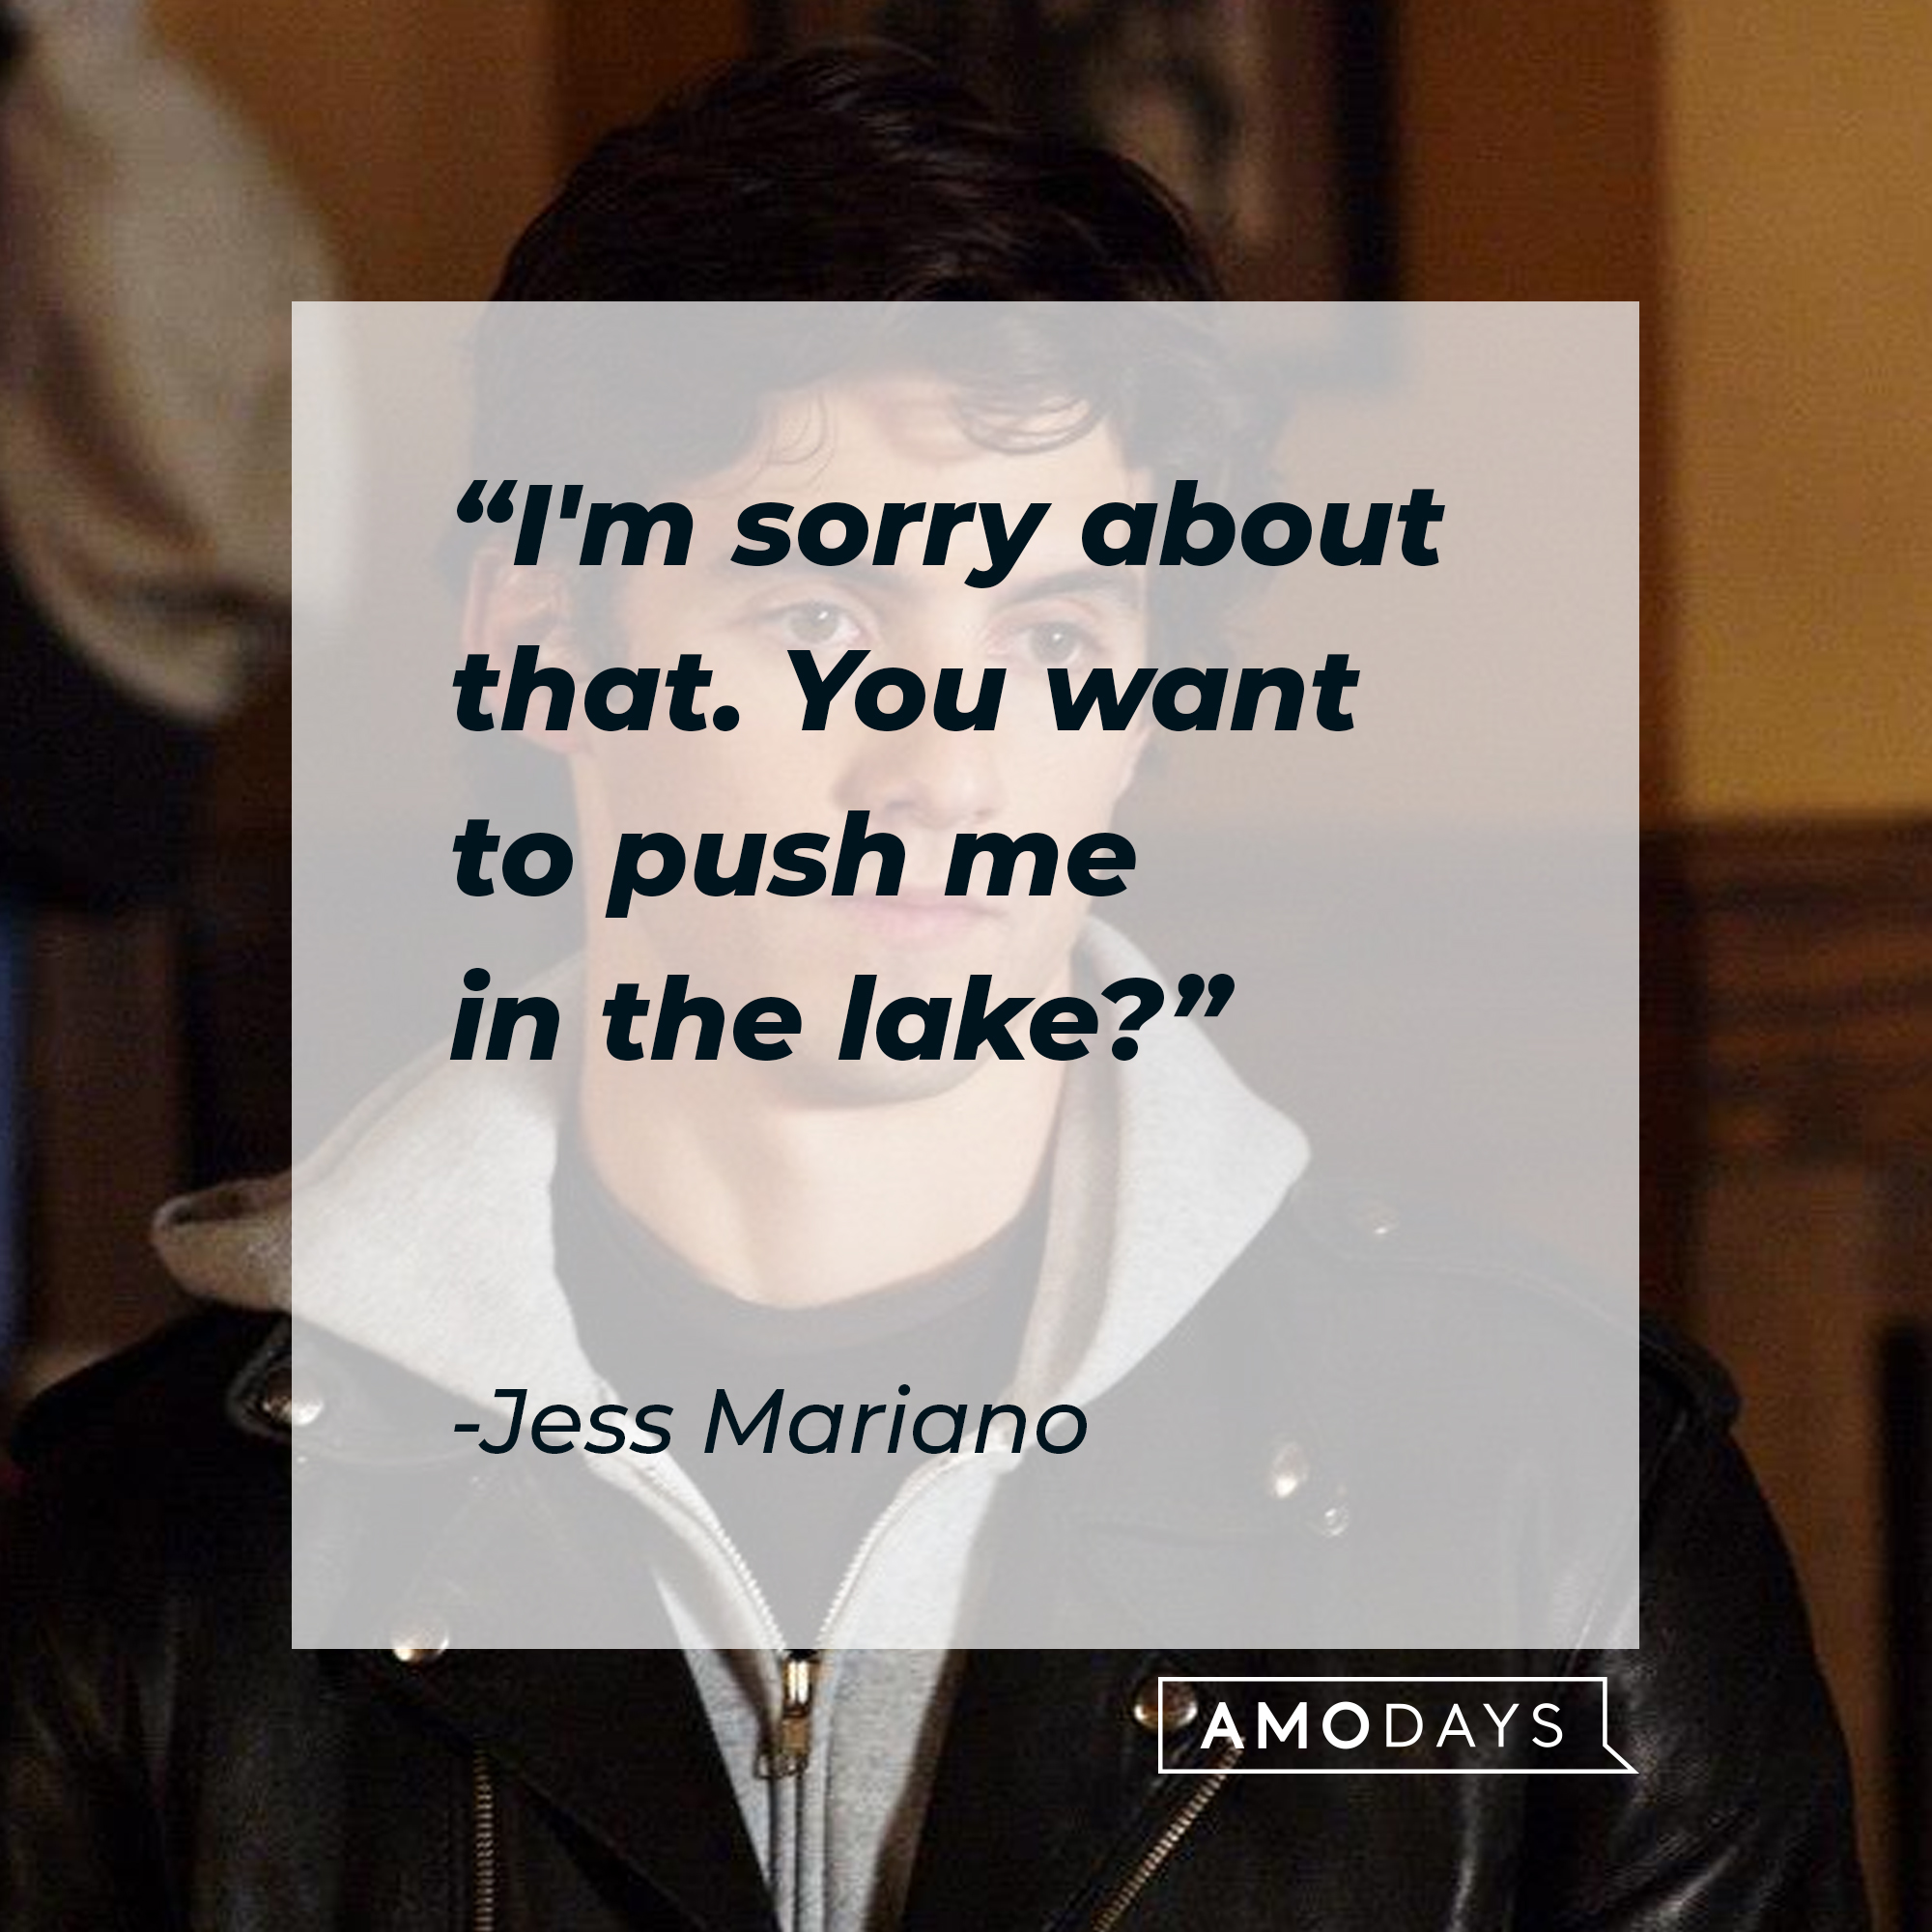 Jess Mariano, with his quote:"I'm sorry about that. You want to push me in the lake?" | Source: facebook.com/GilmoreGirls